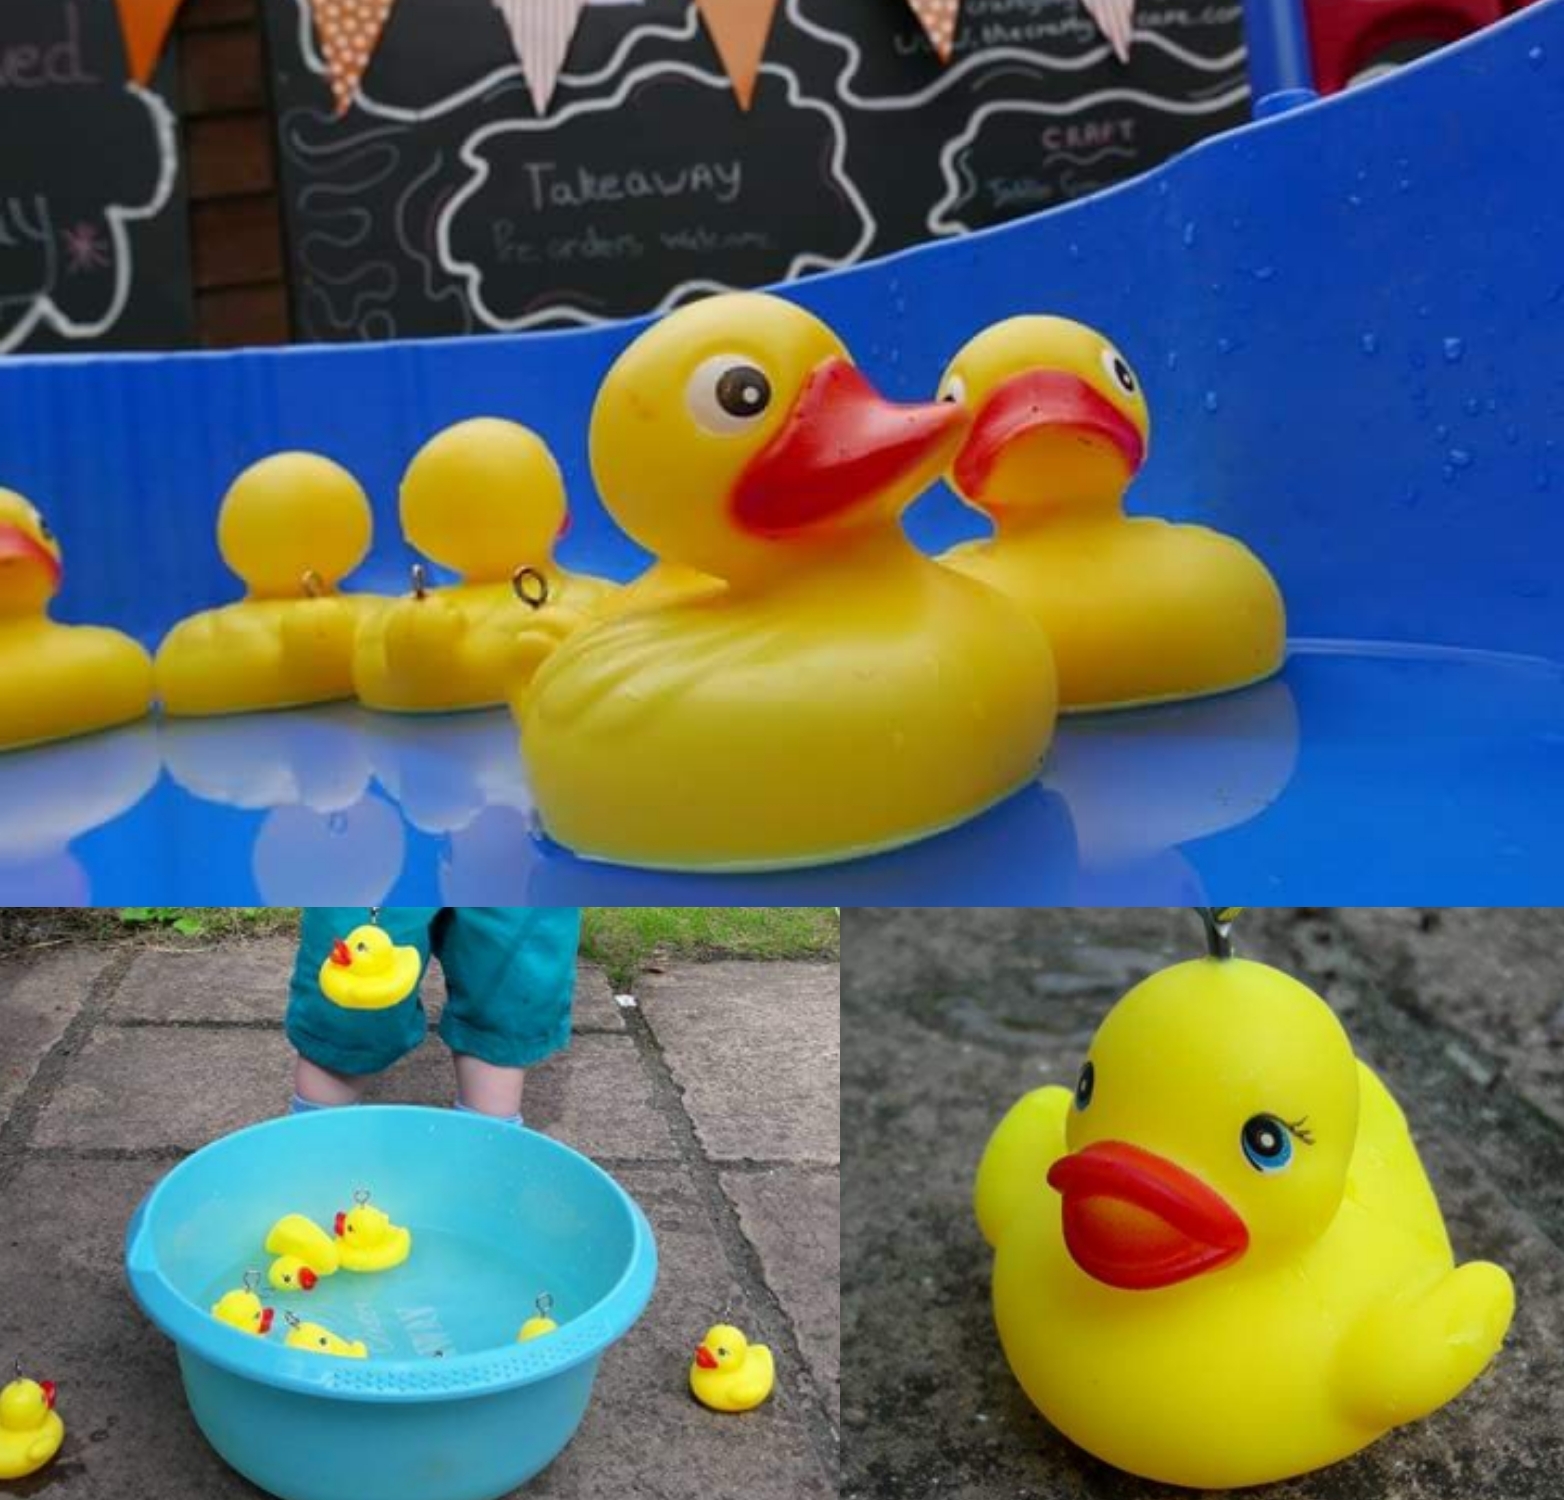 Make your own 'Hook a duck' game – Childsplayabc ~ Nature is our